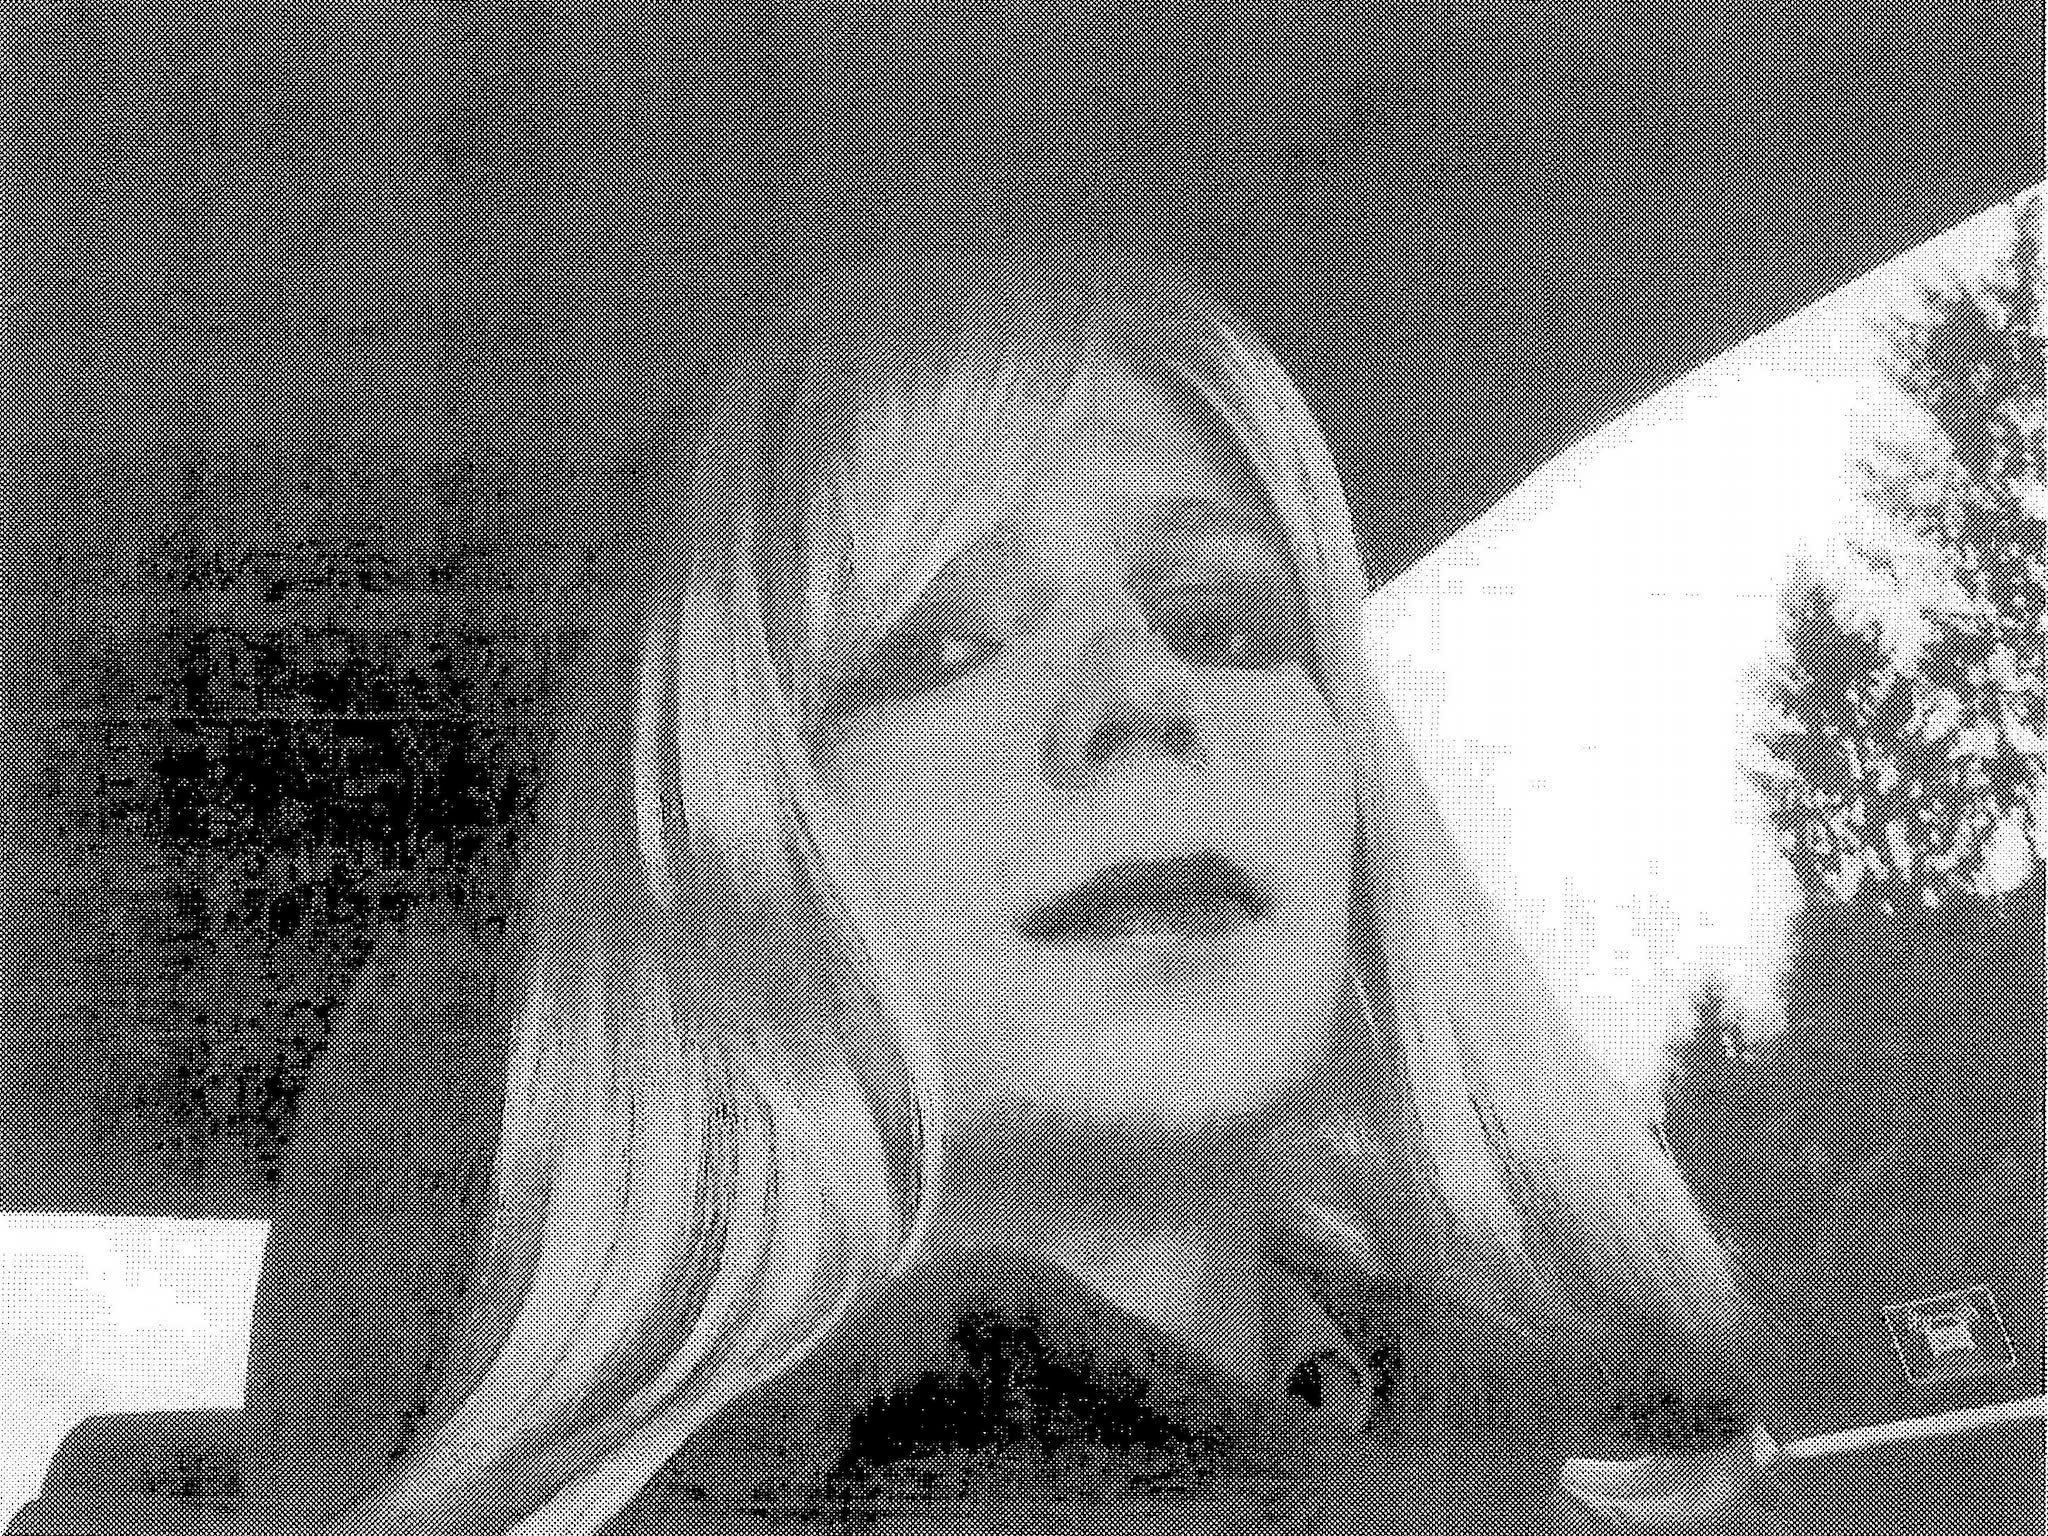 Chelsea Manning has tried to kill herself twice in the past year